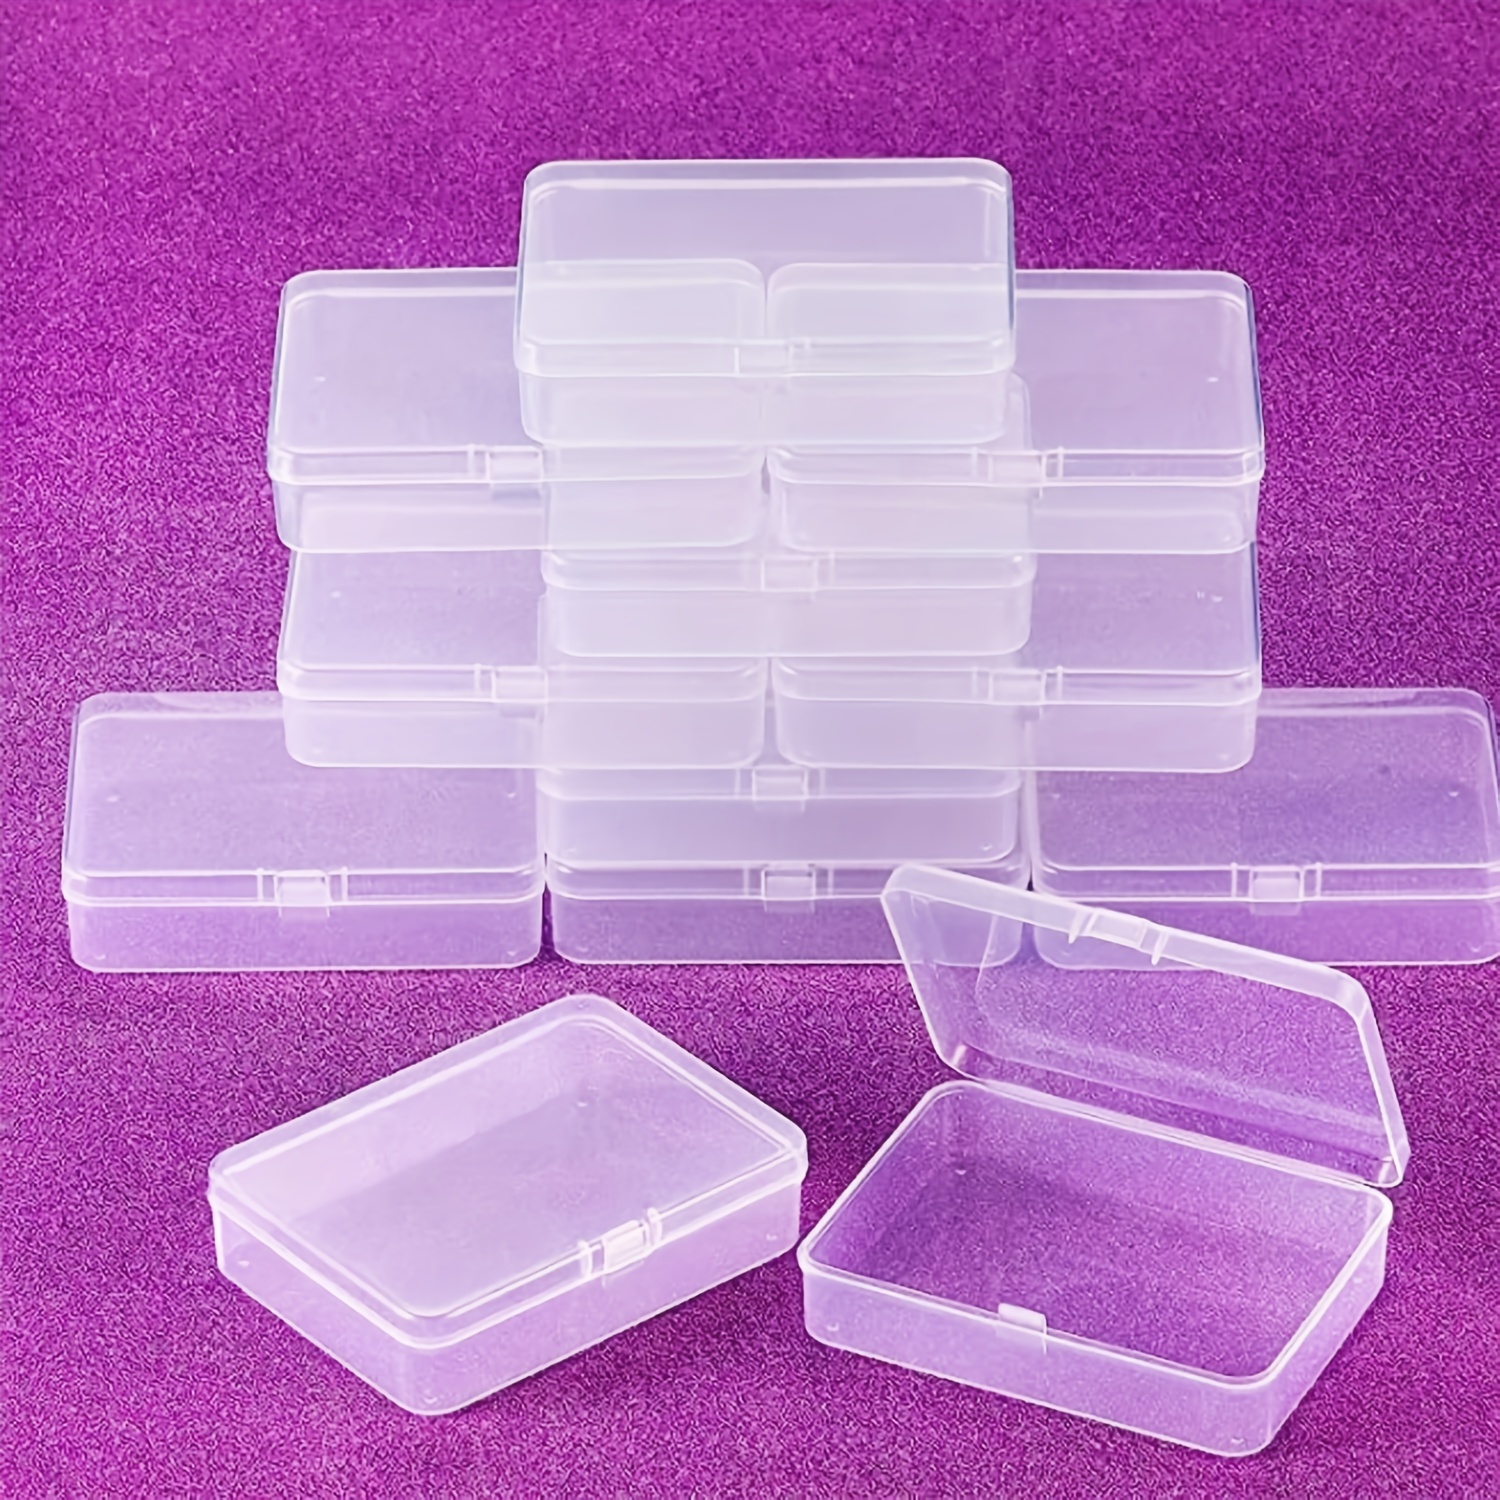 8 Pieces Containers With Lids, Small Storage Box, Mini Portable